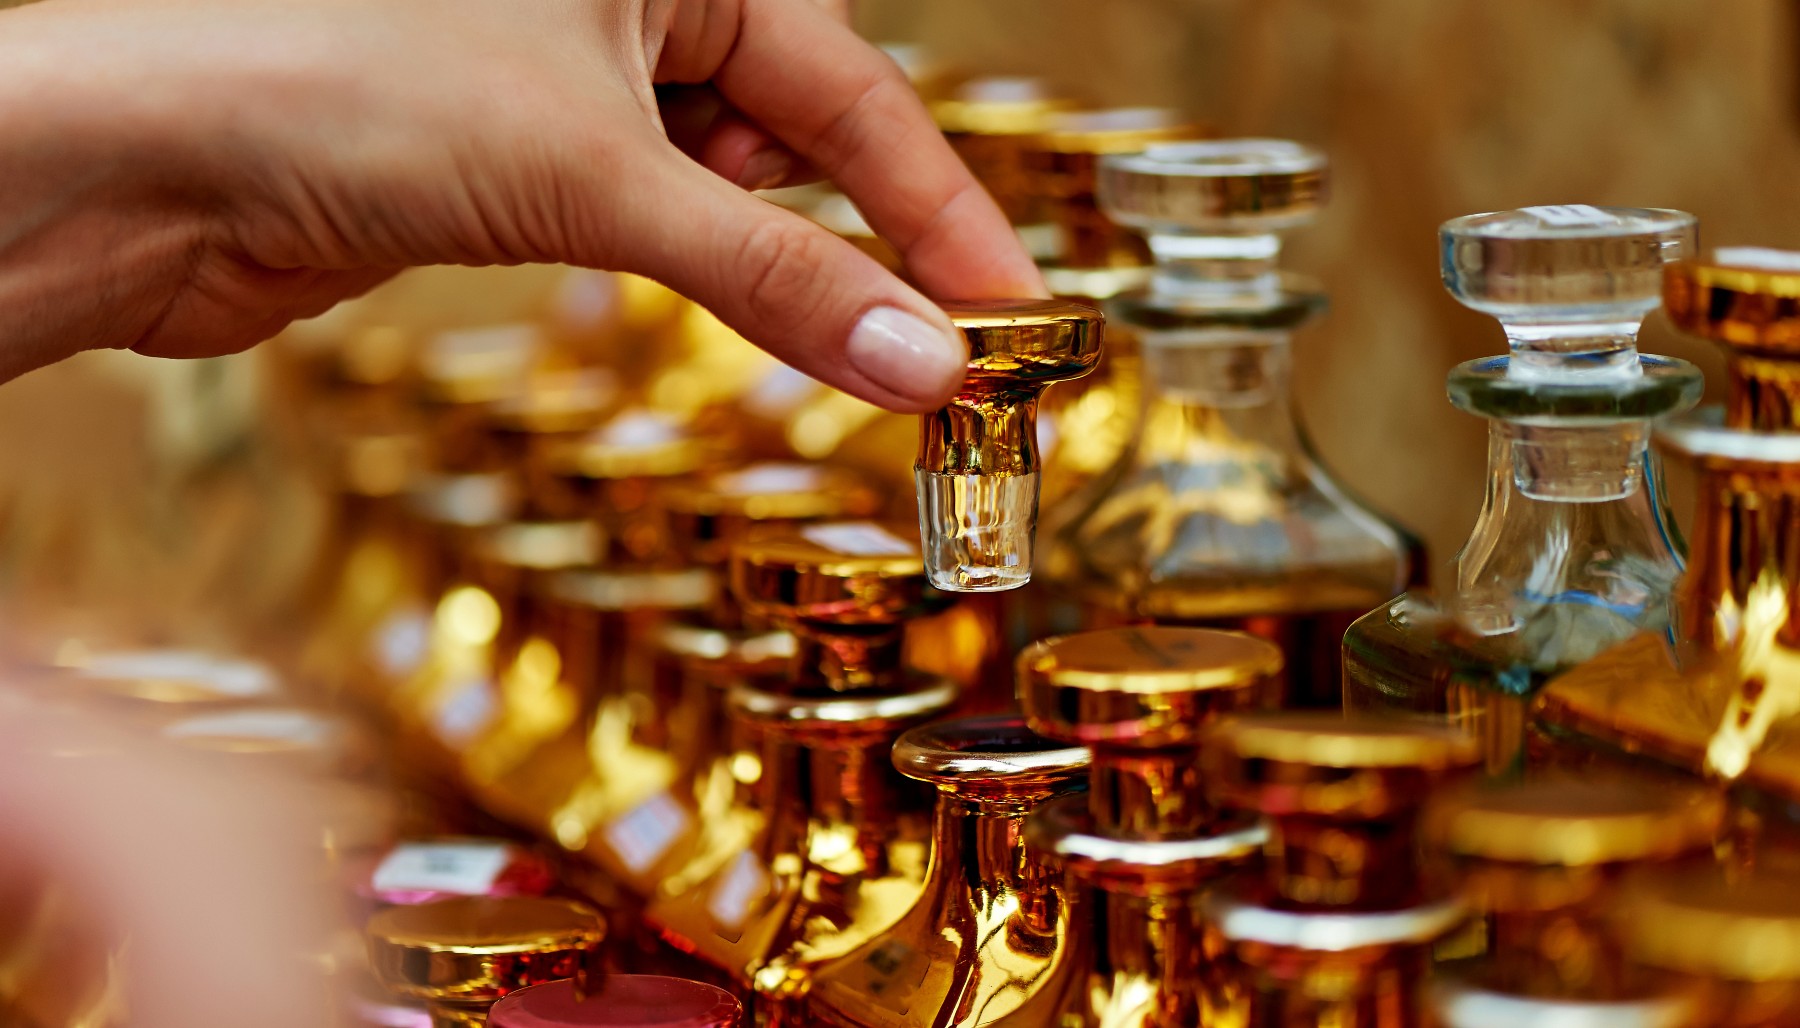 a hand opening a bottle of perfume